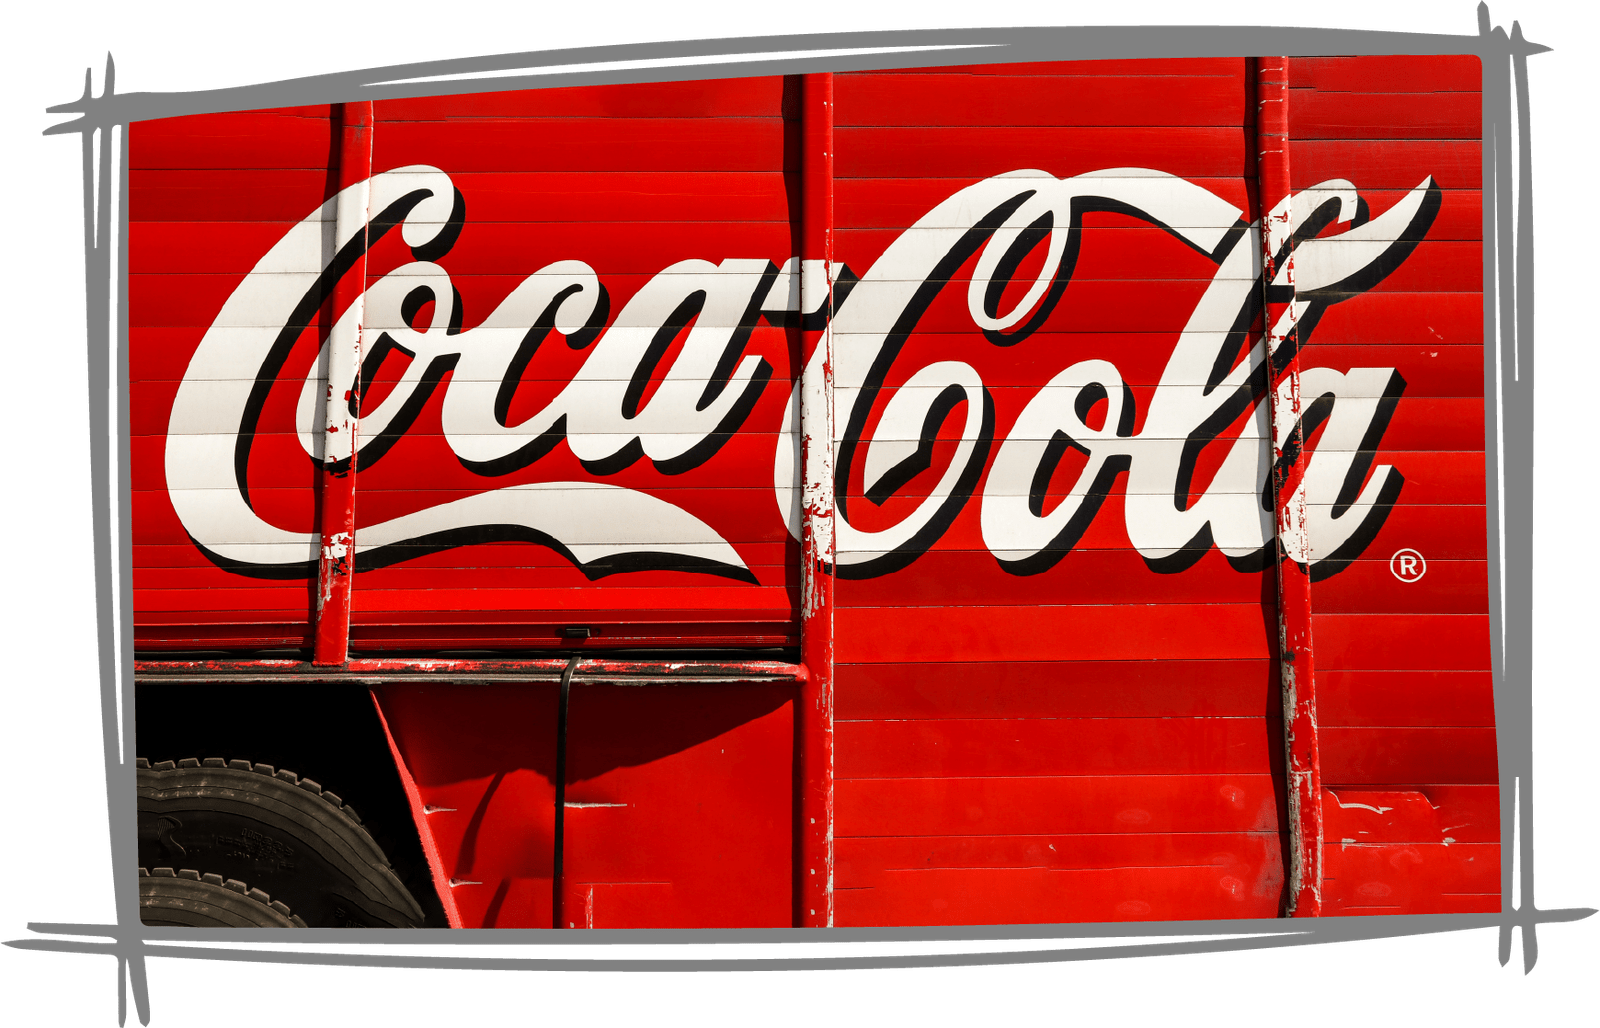 color psychology of Red, Brand example: Coca-Cola